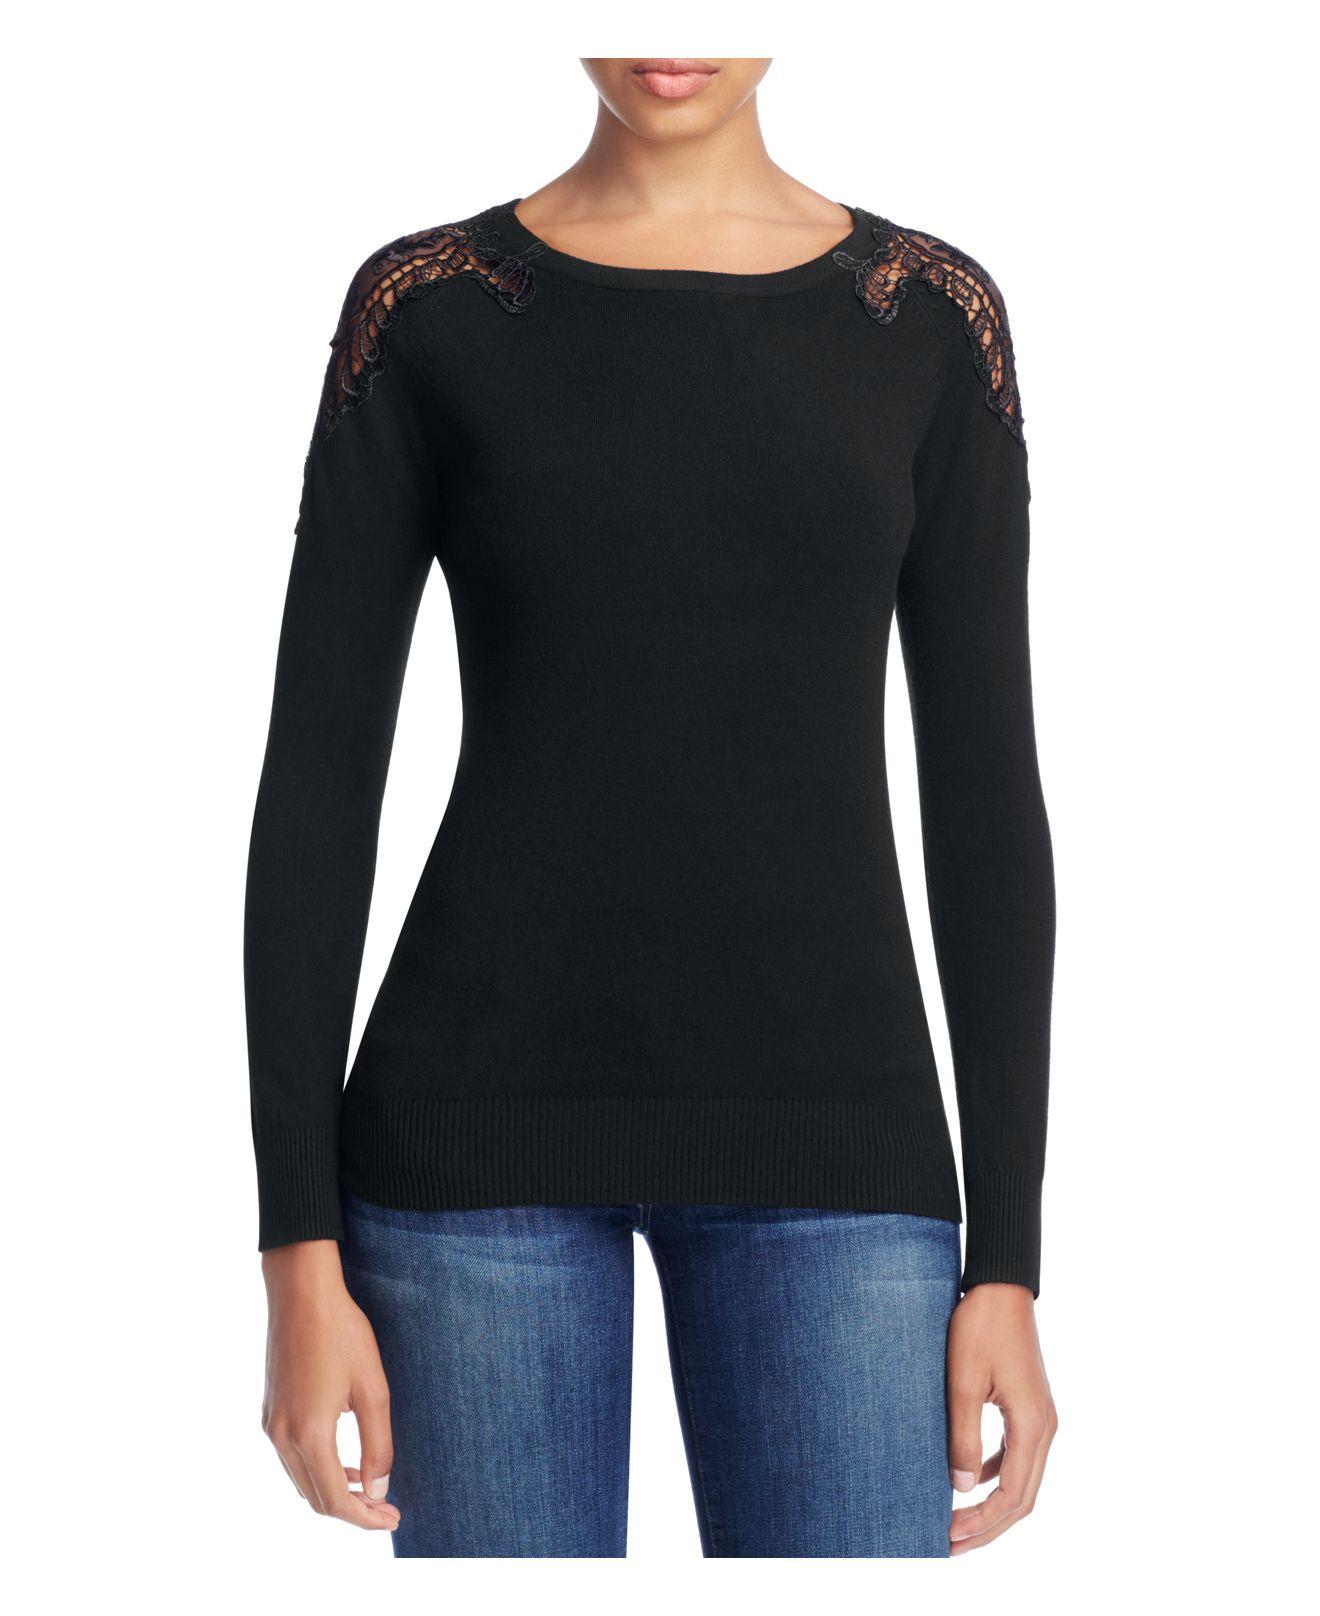 Lyst - Sioni Lace Shoulder Sweater in Black